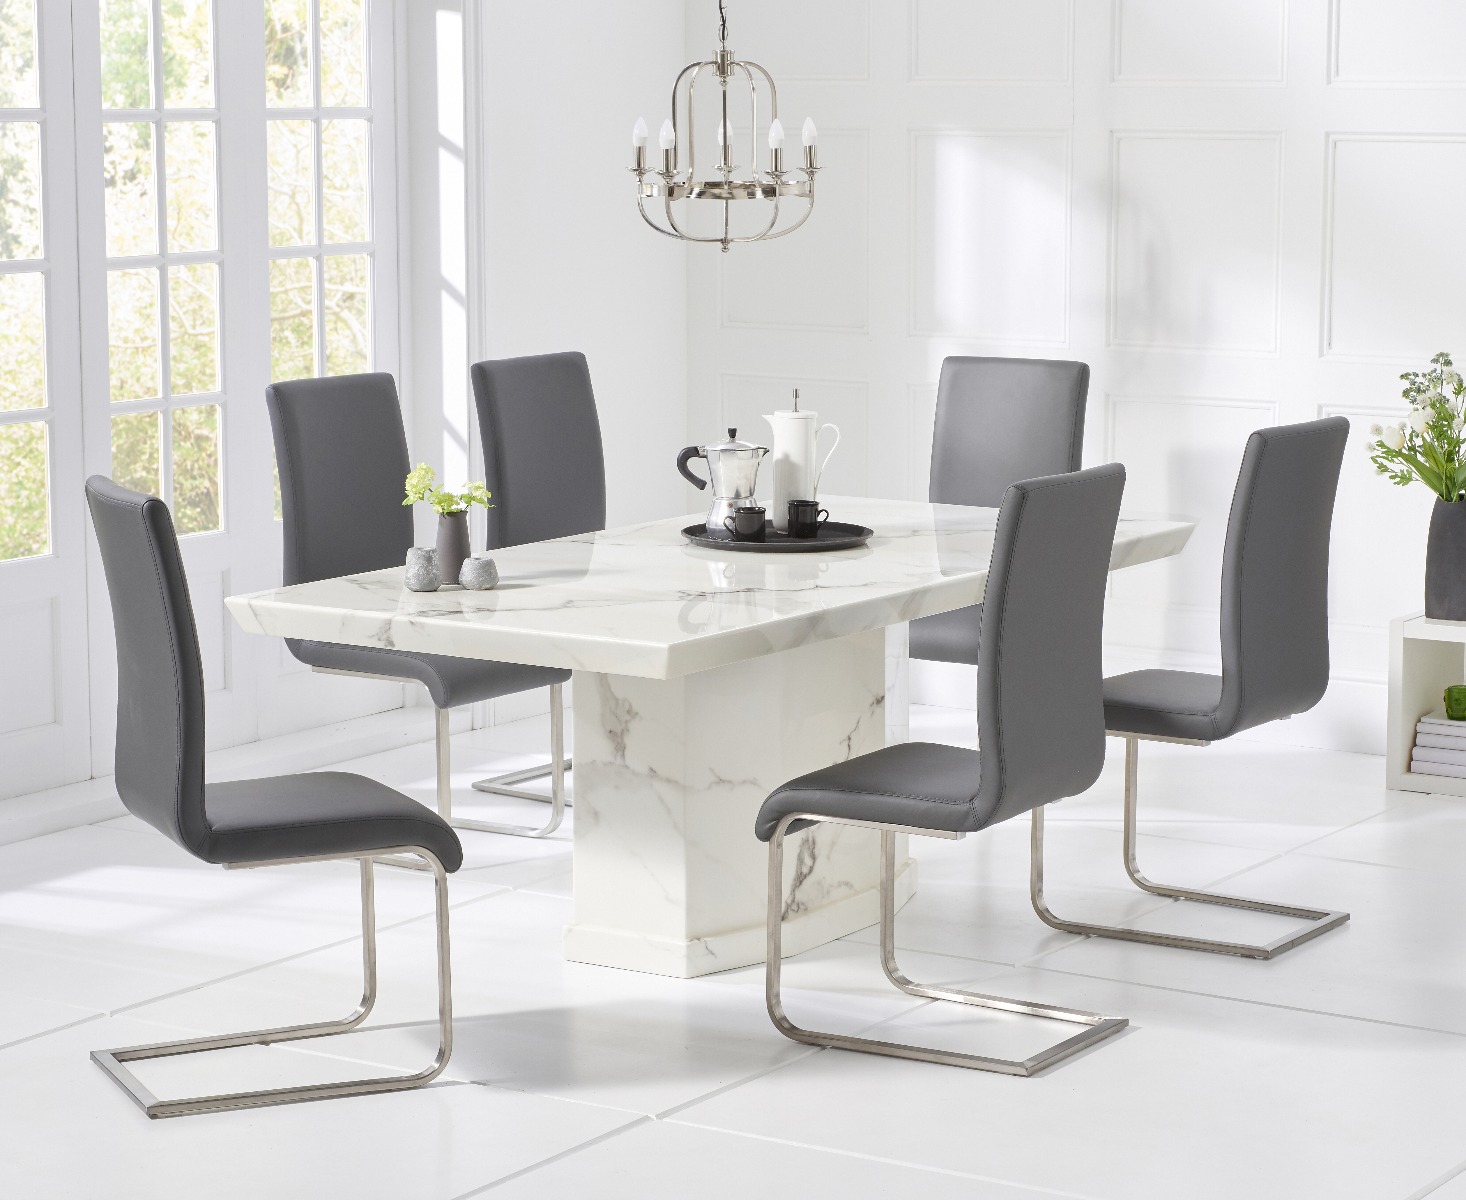 Carvelle 200cm White Pedestal Marble Dining Table With 6 Black Malaga Chairs